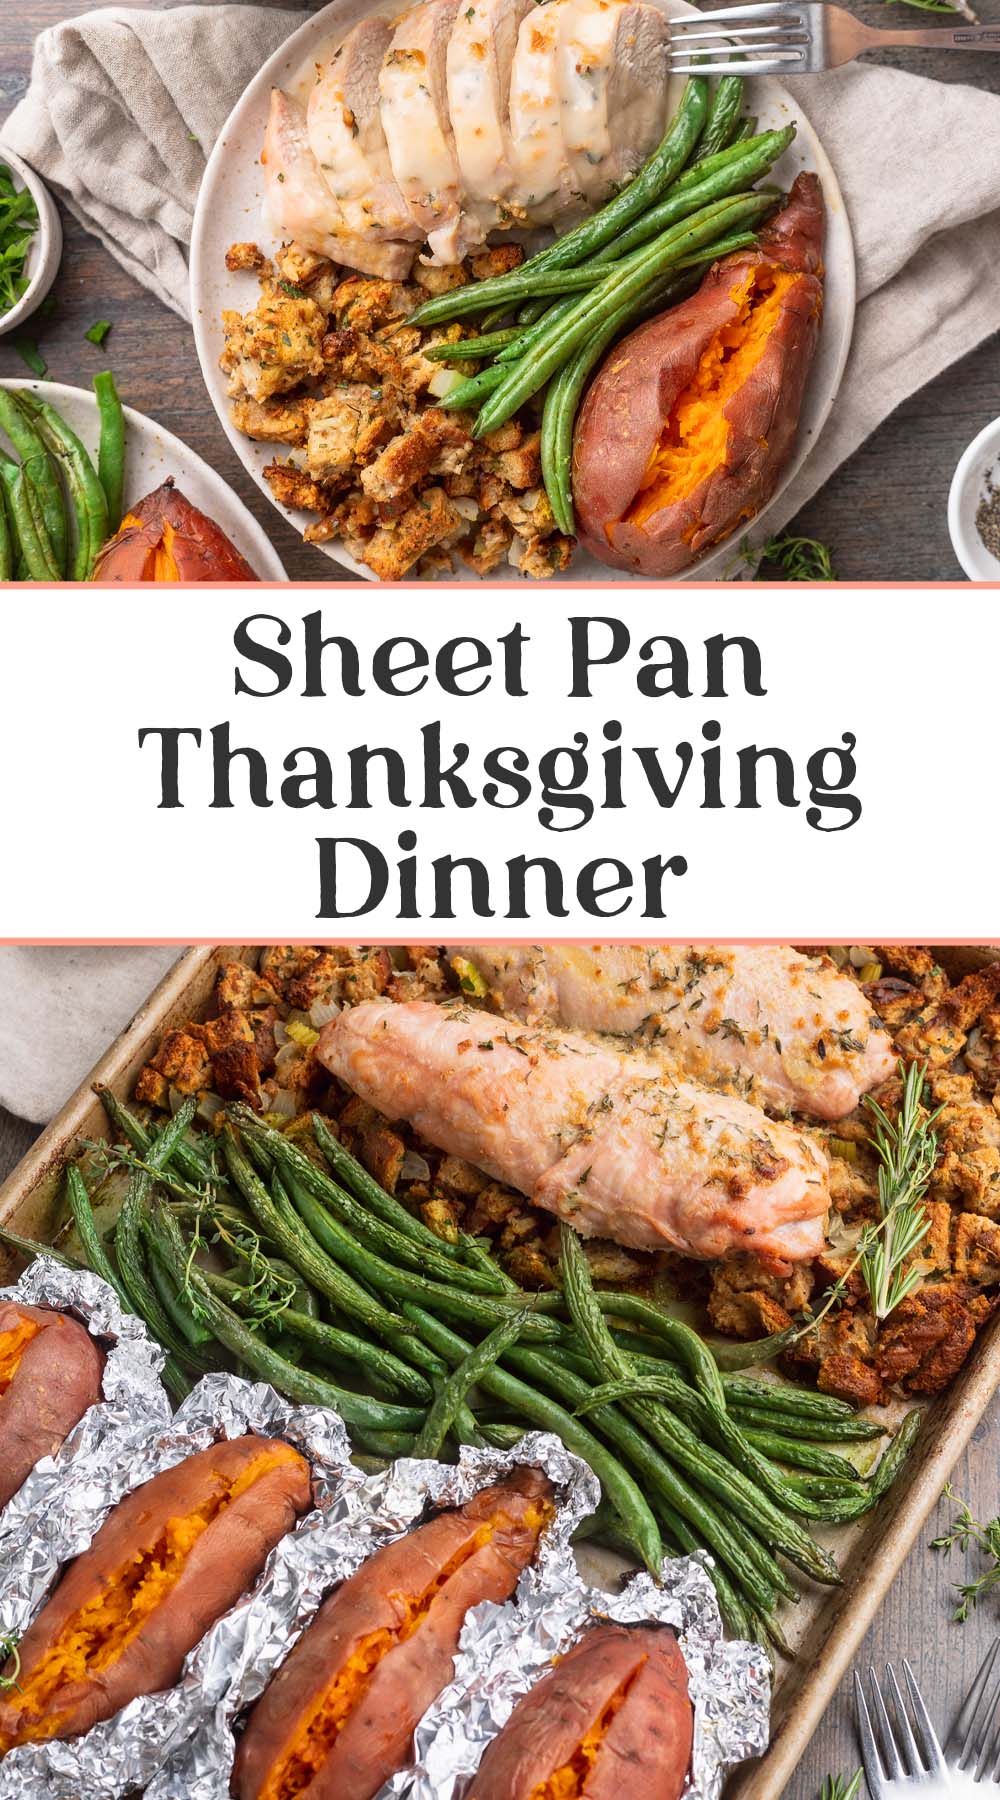 Pin graphic for one-pan holiday meal.